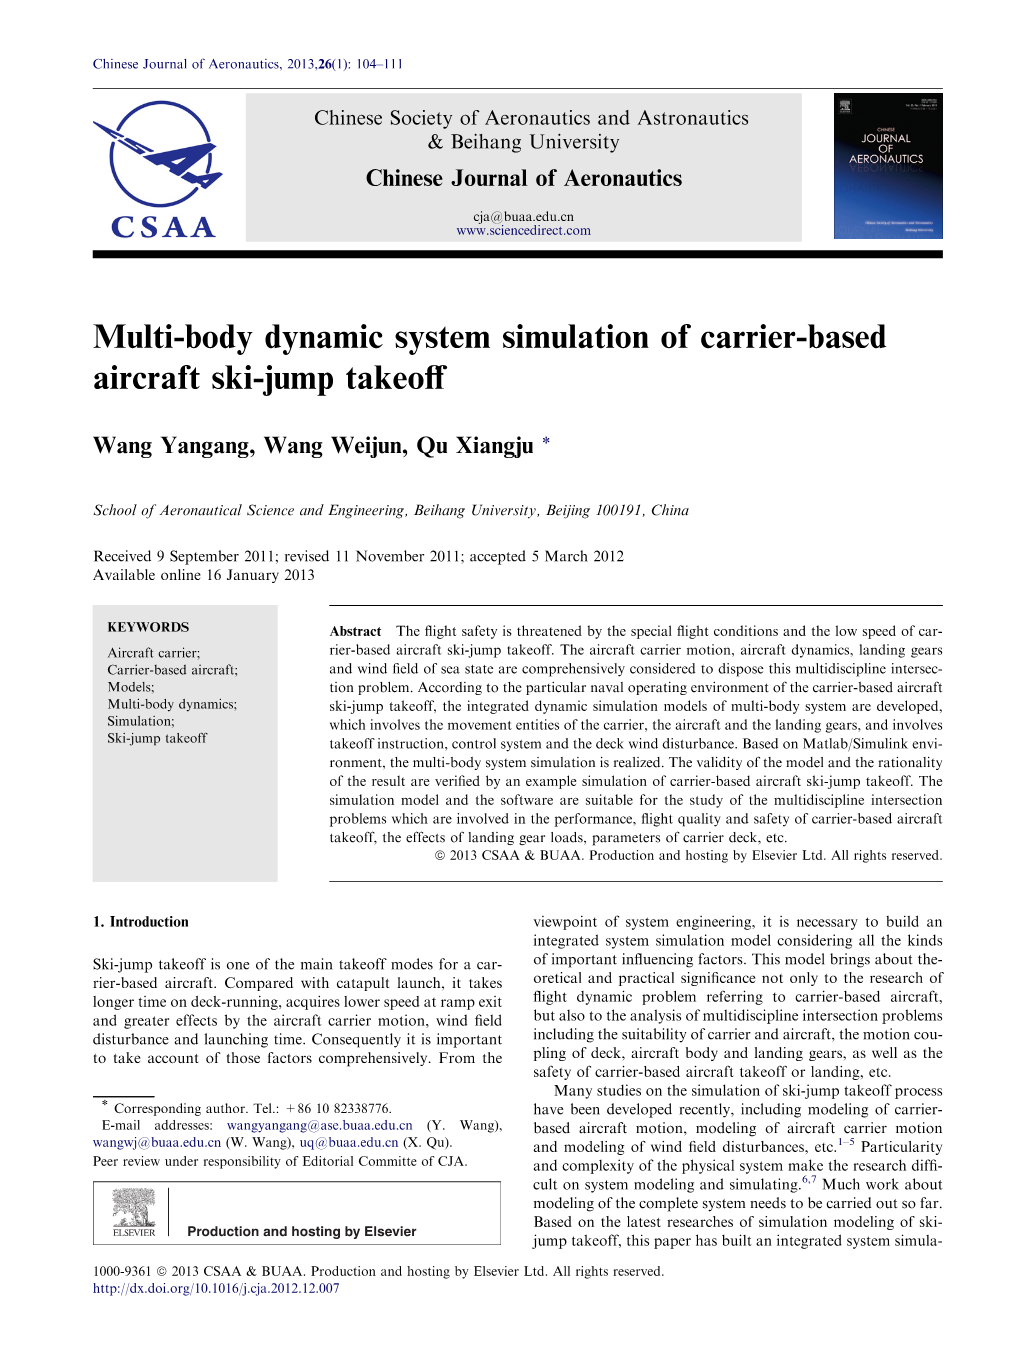 Multi-Body Dynamic System Simulation of Carrier-Based Aircraft Ski-Jump Takeoﬀ